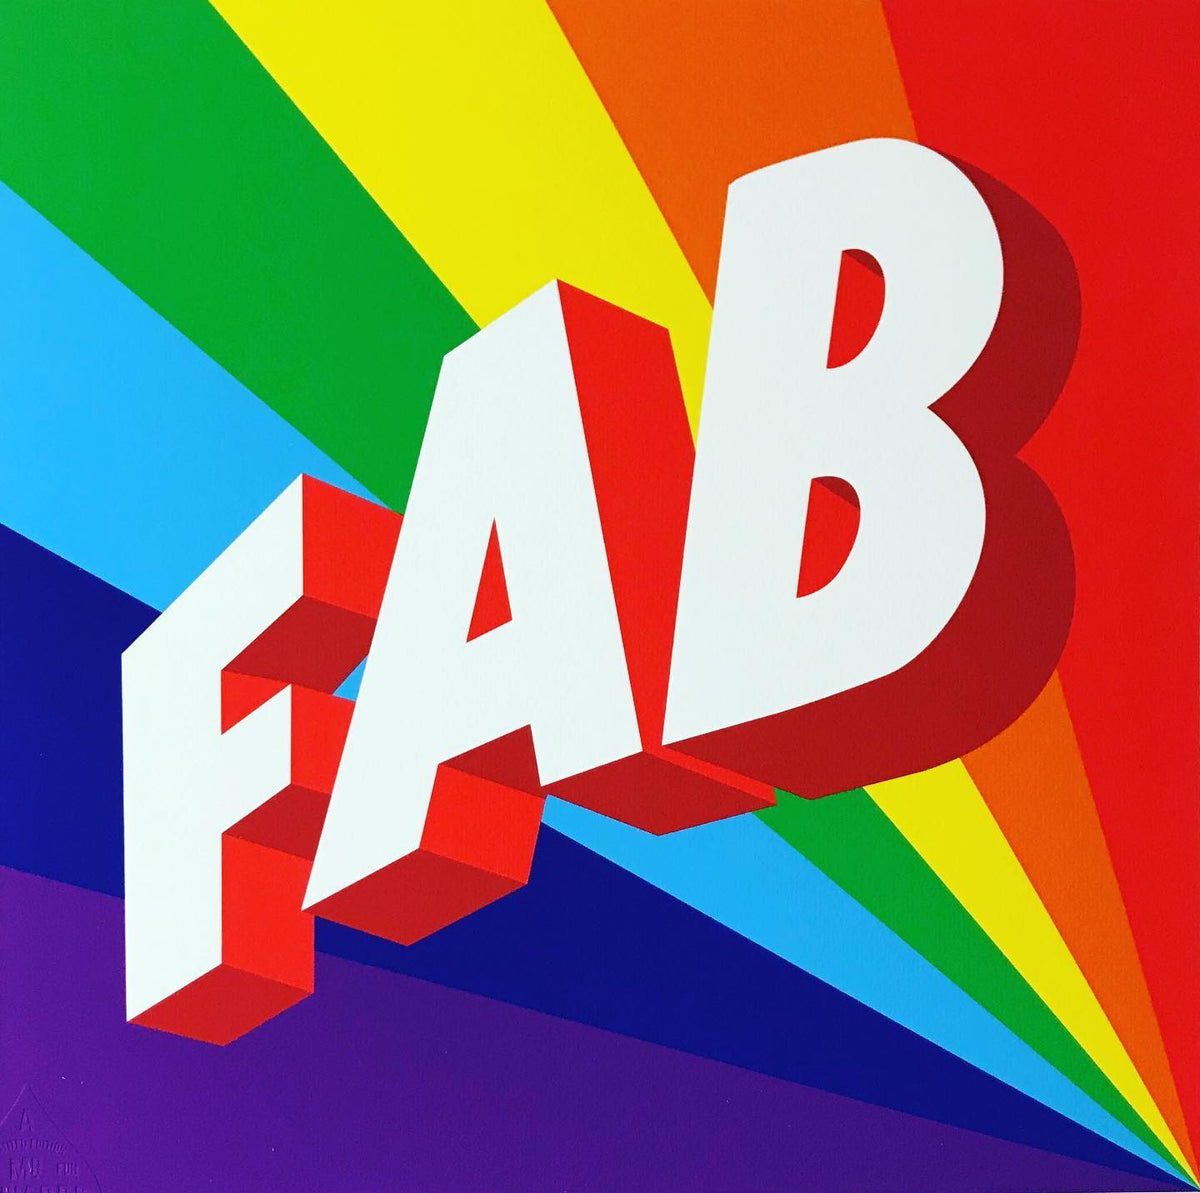 Fab by Mister Edwards